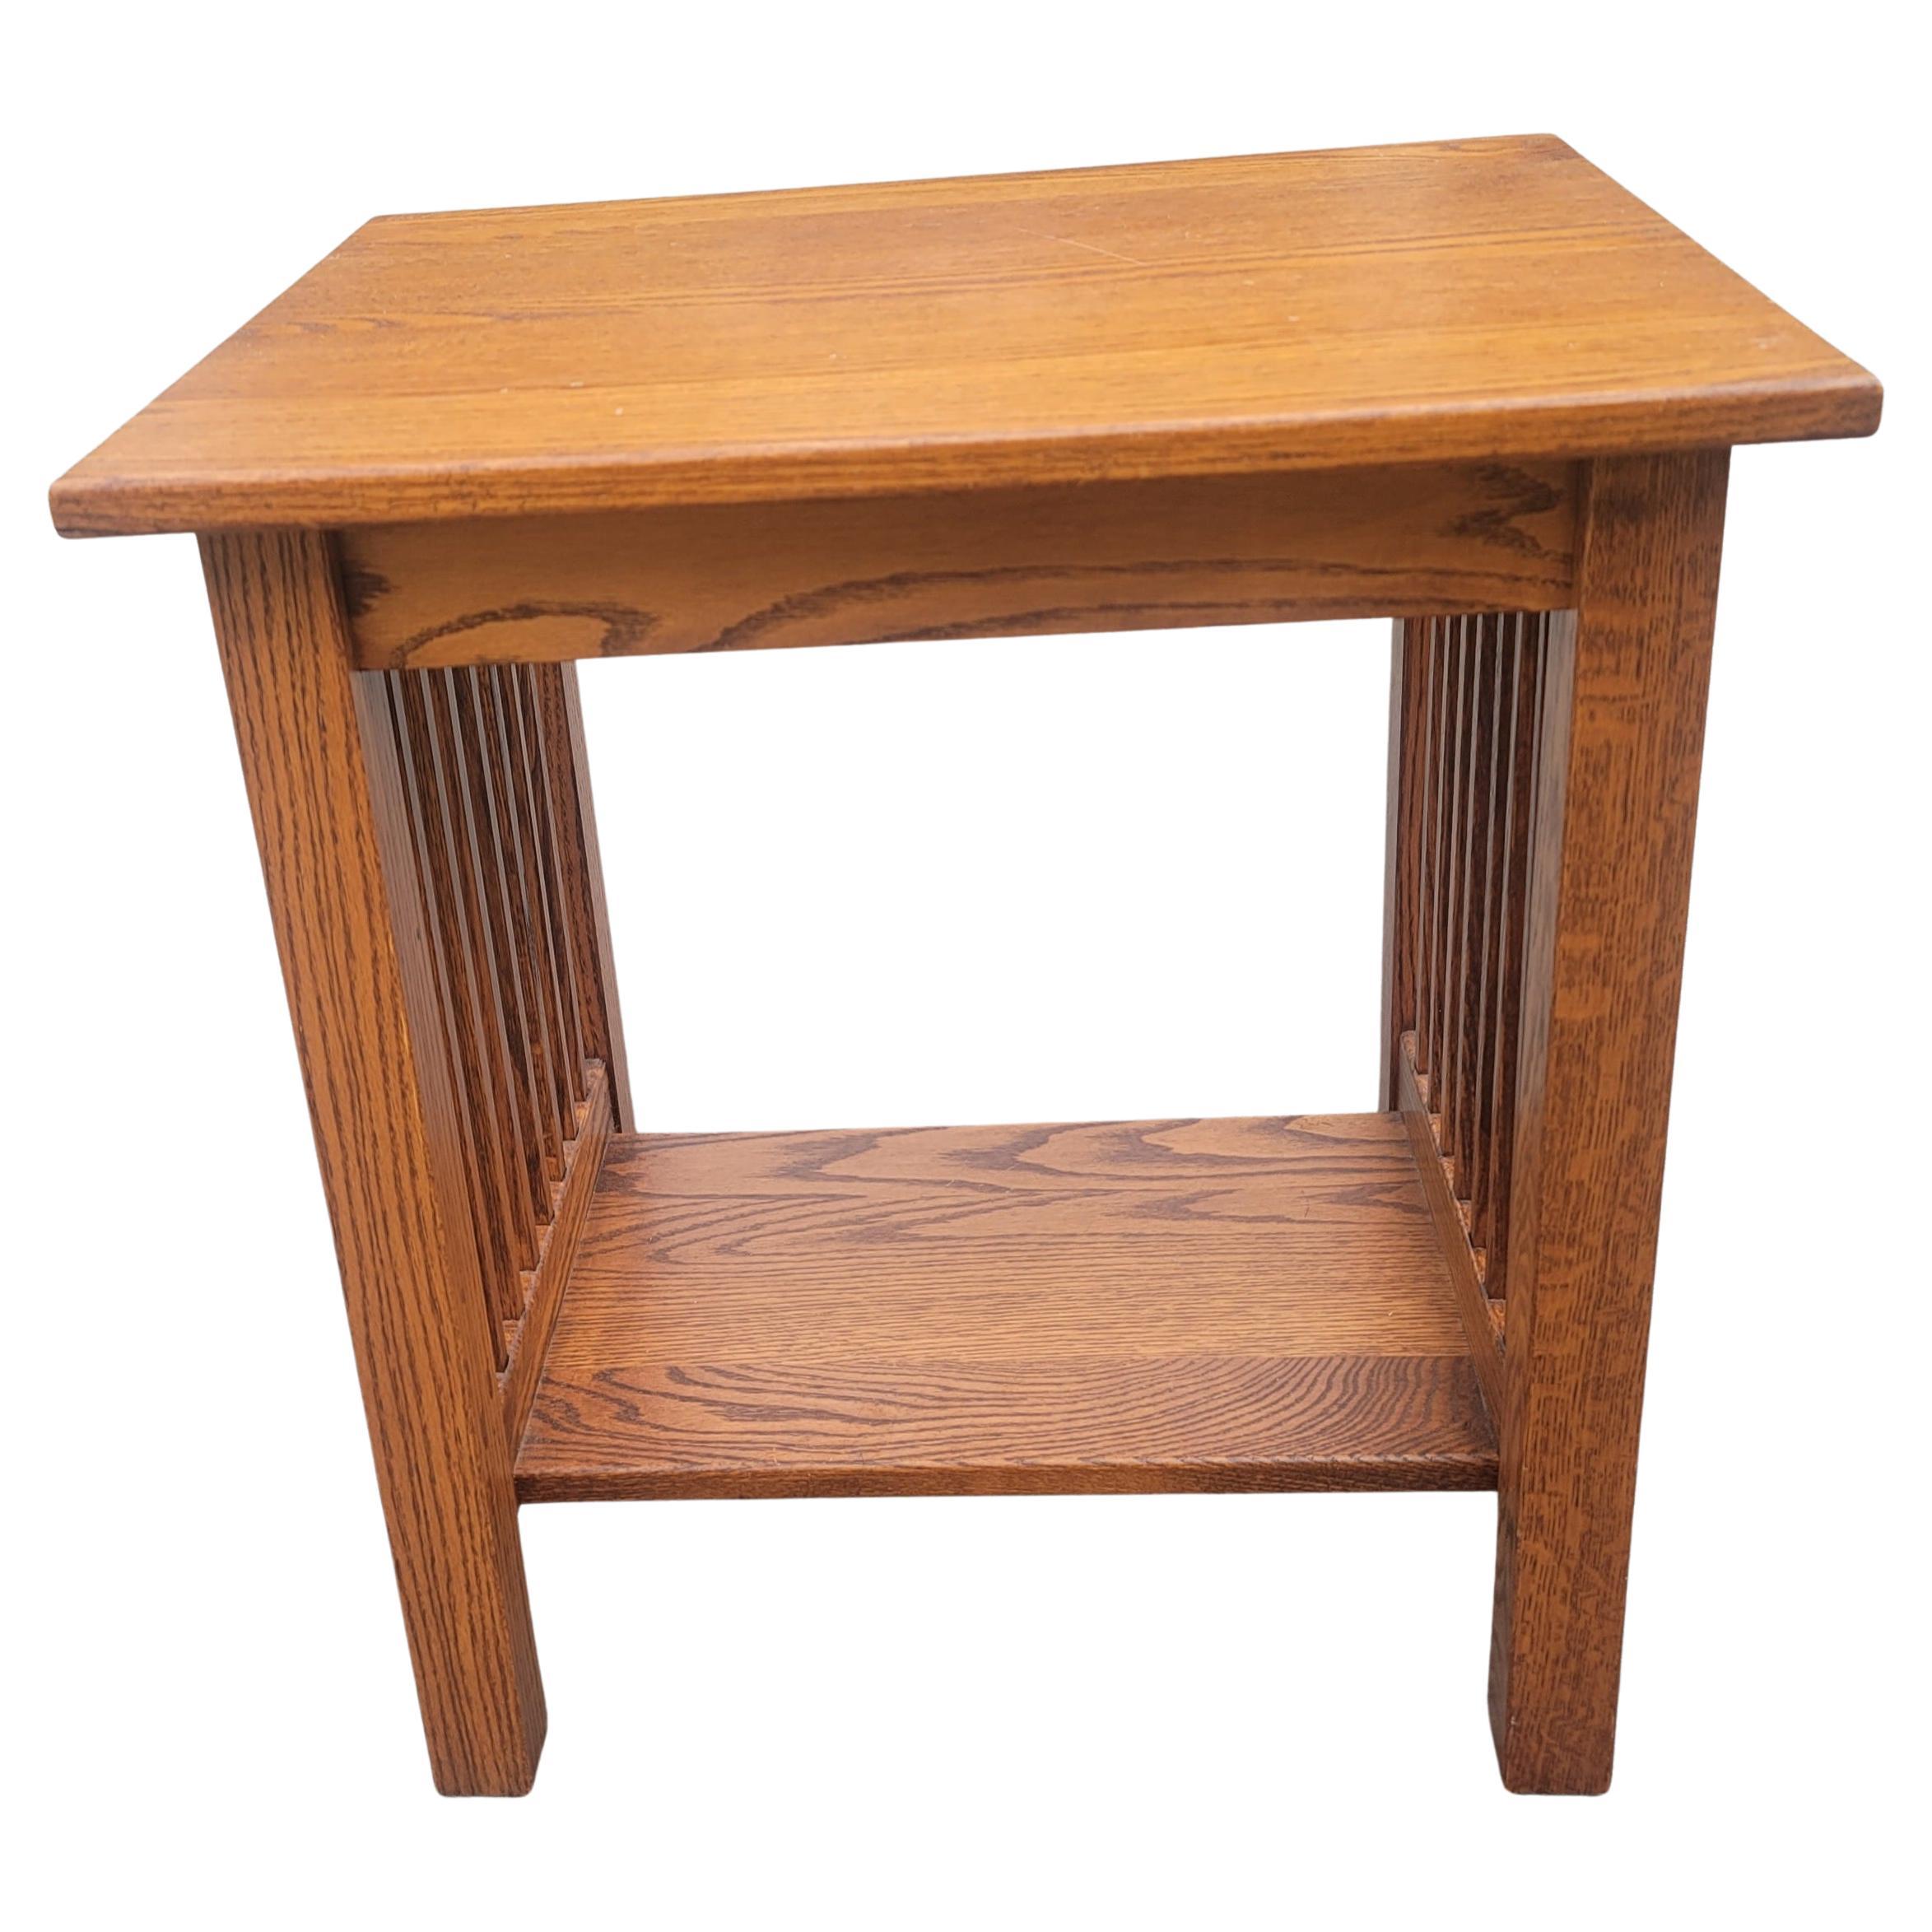 American Country View Amish Arts & Crafts Mission Oak Side Tables, a Pair For Sale